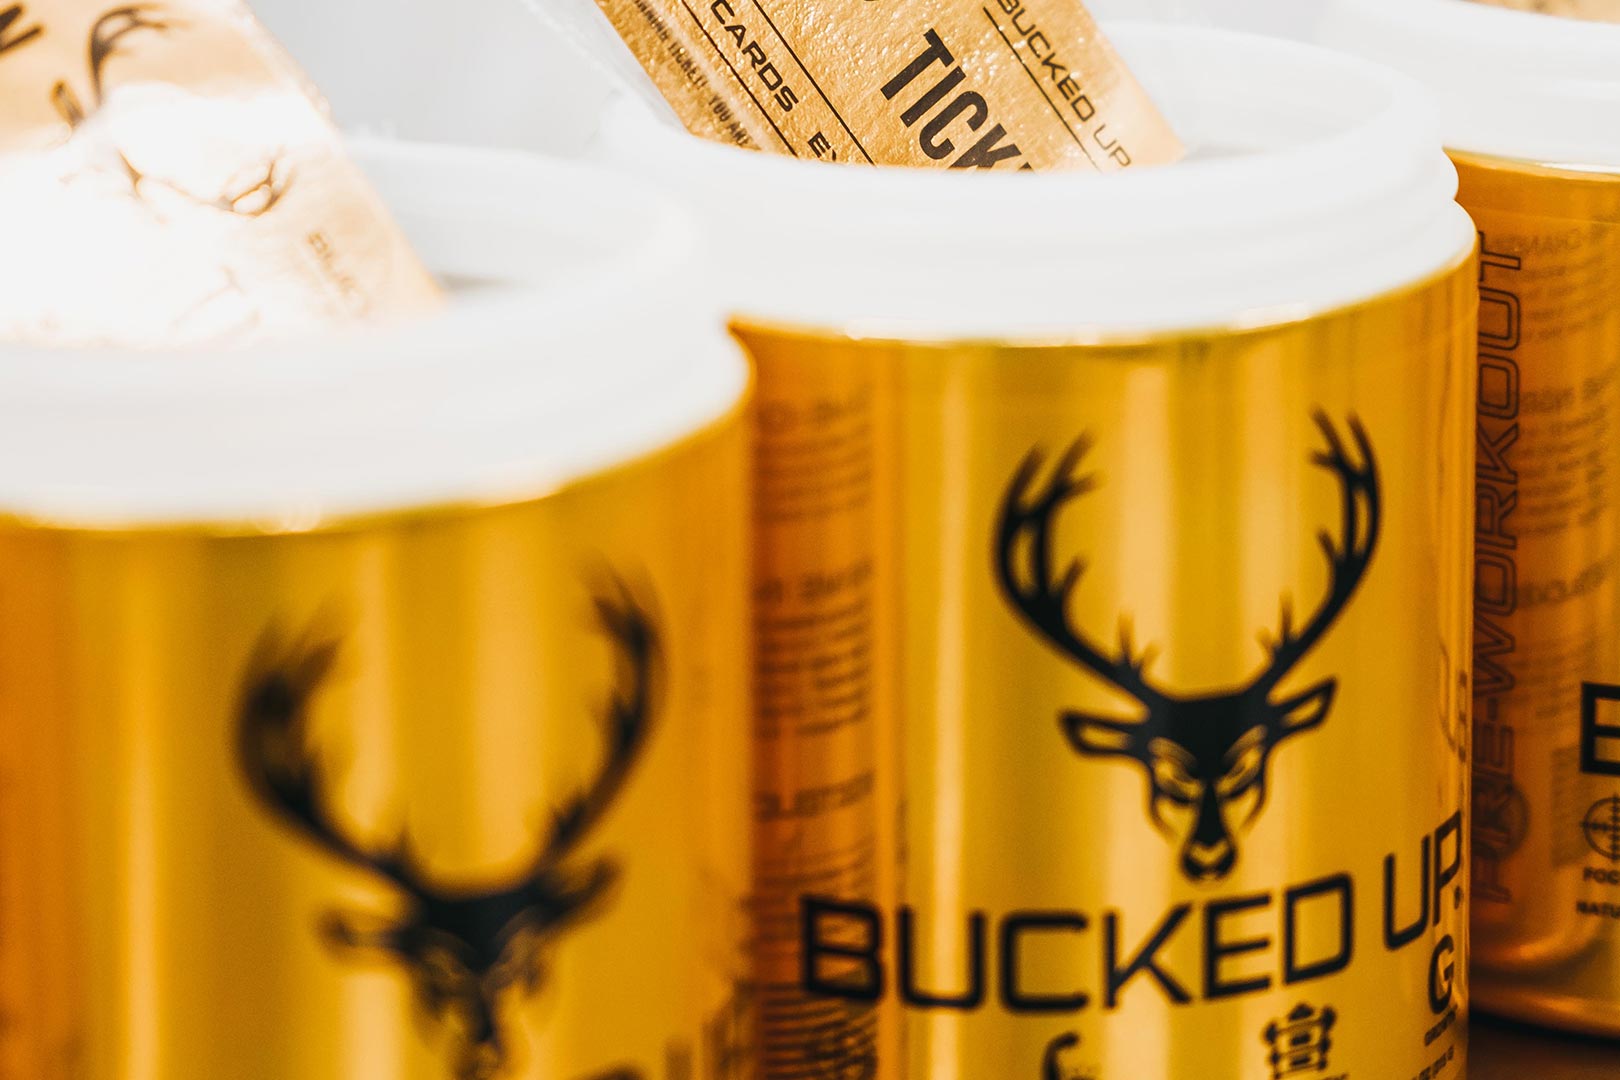 Bucked Up Golden Ticket Campaign